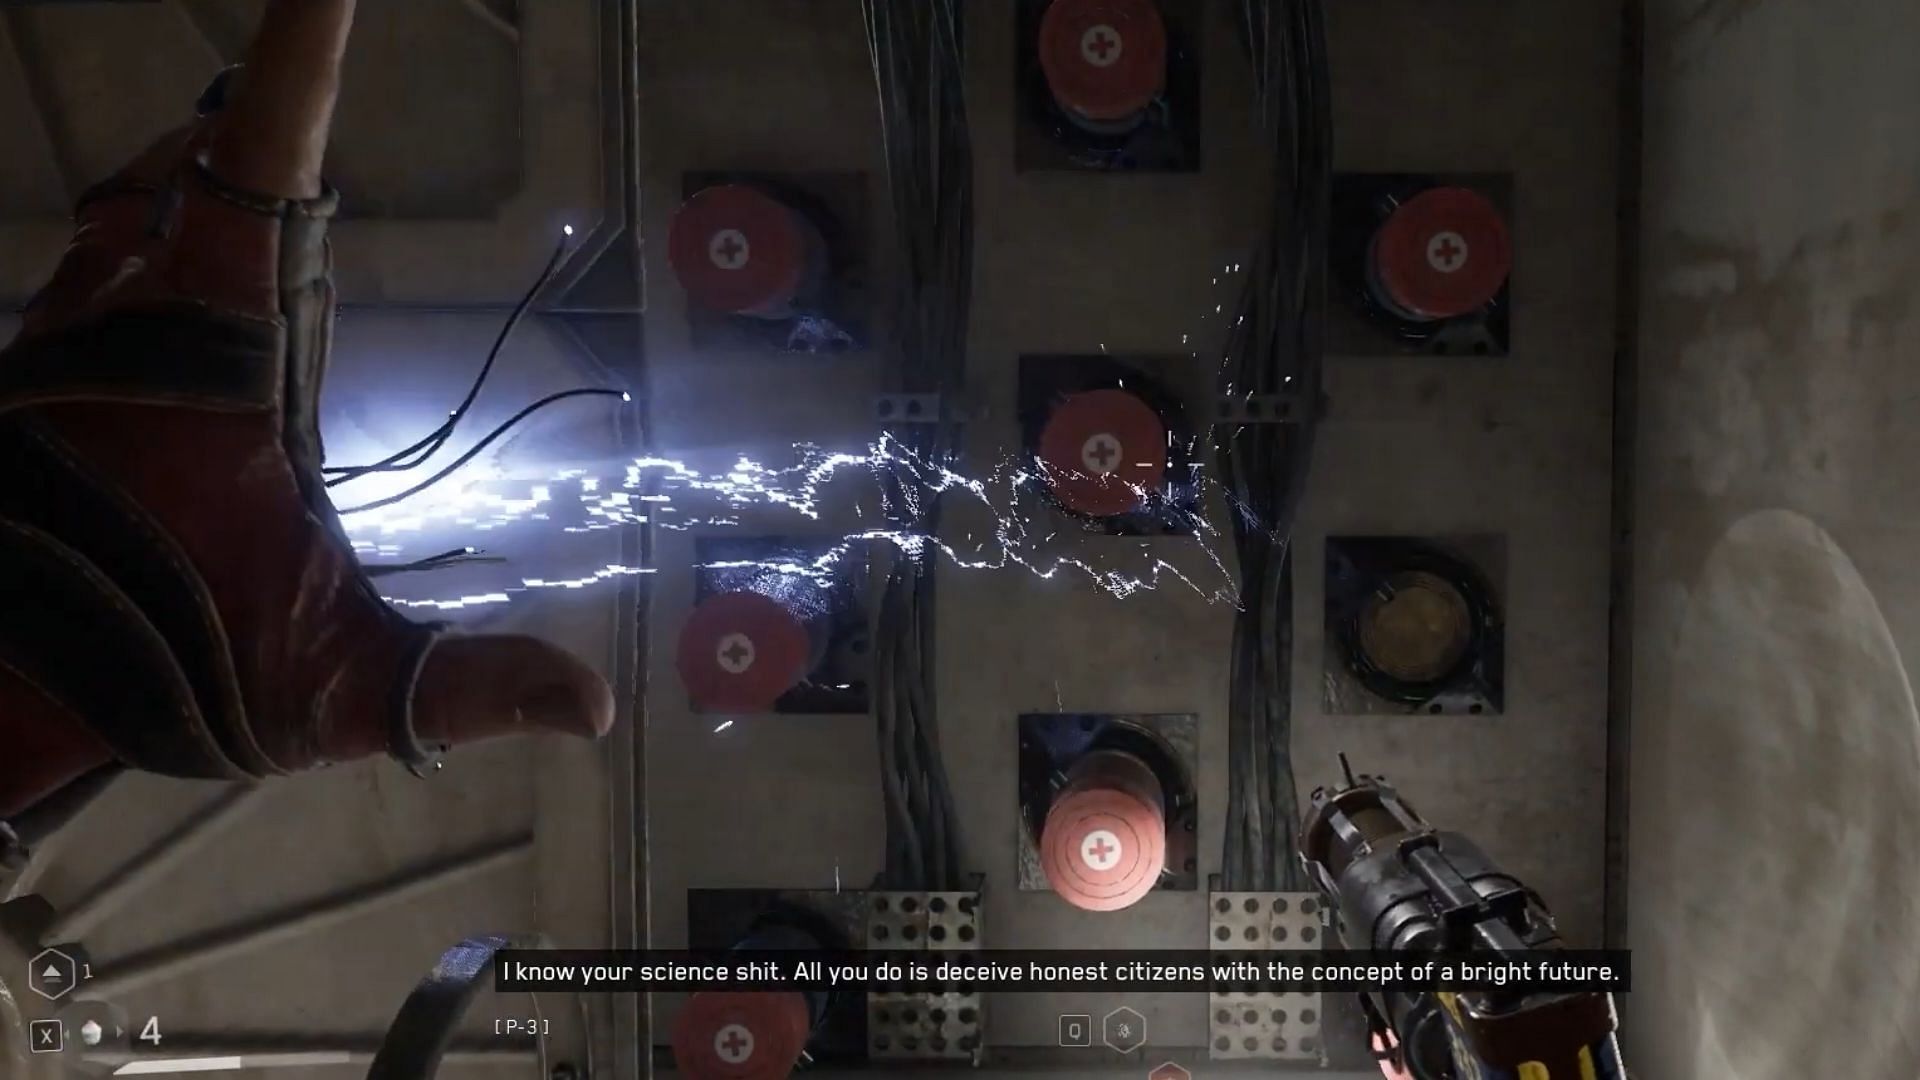 Players must use Shok ability to manipulate the magnetic coils (Image via YouTube/GameGuidesChannel)